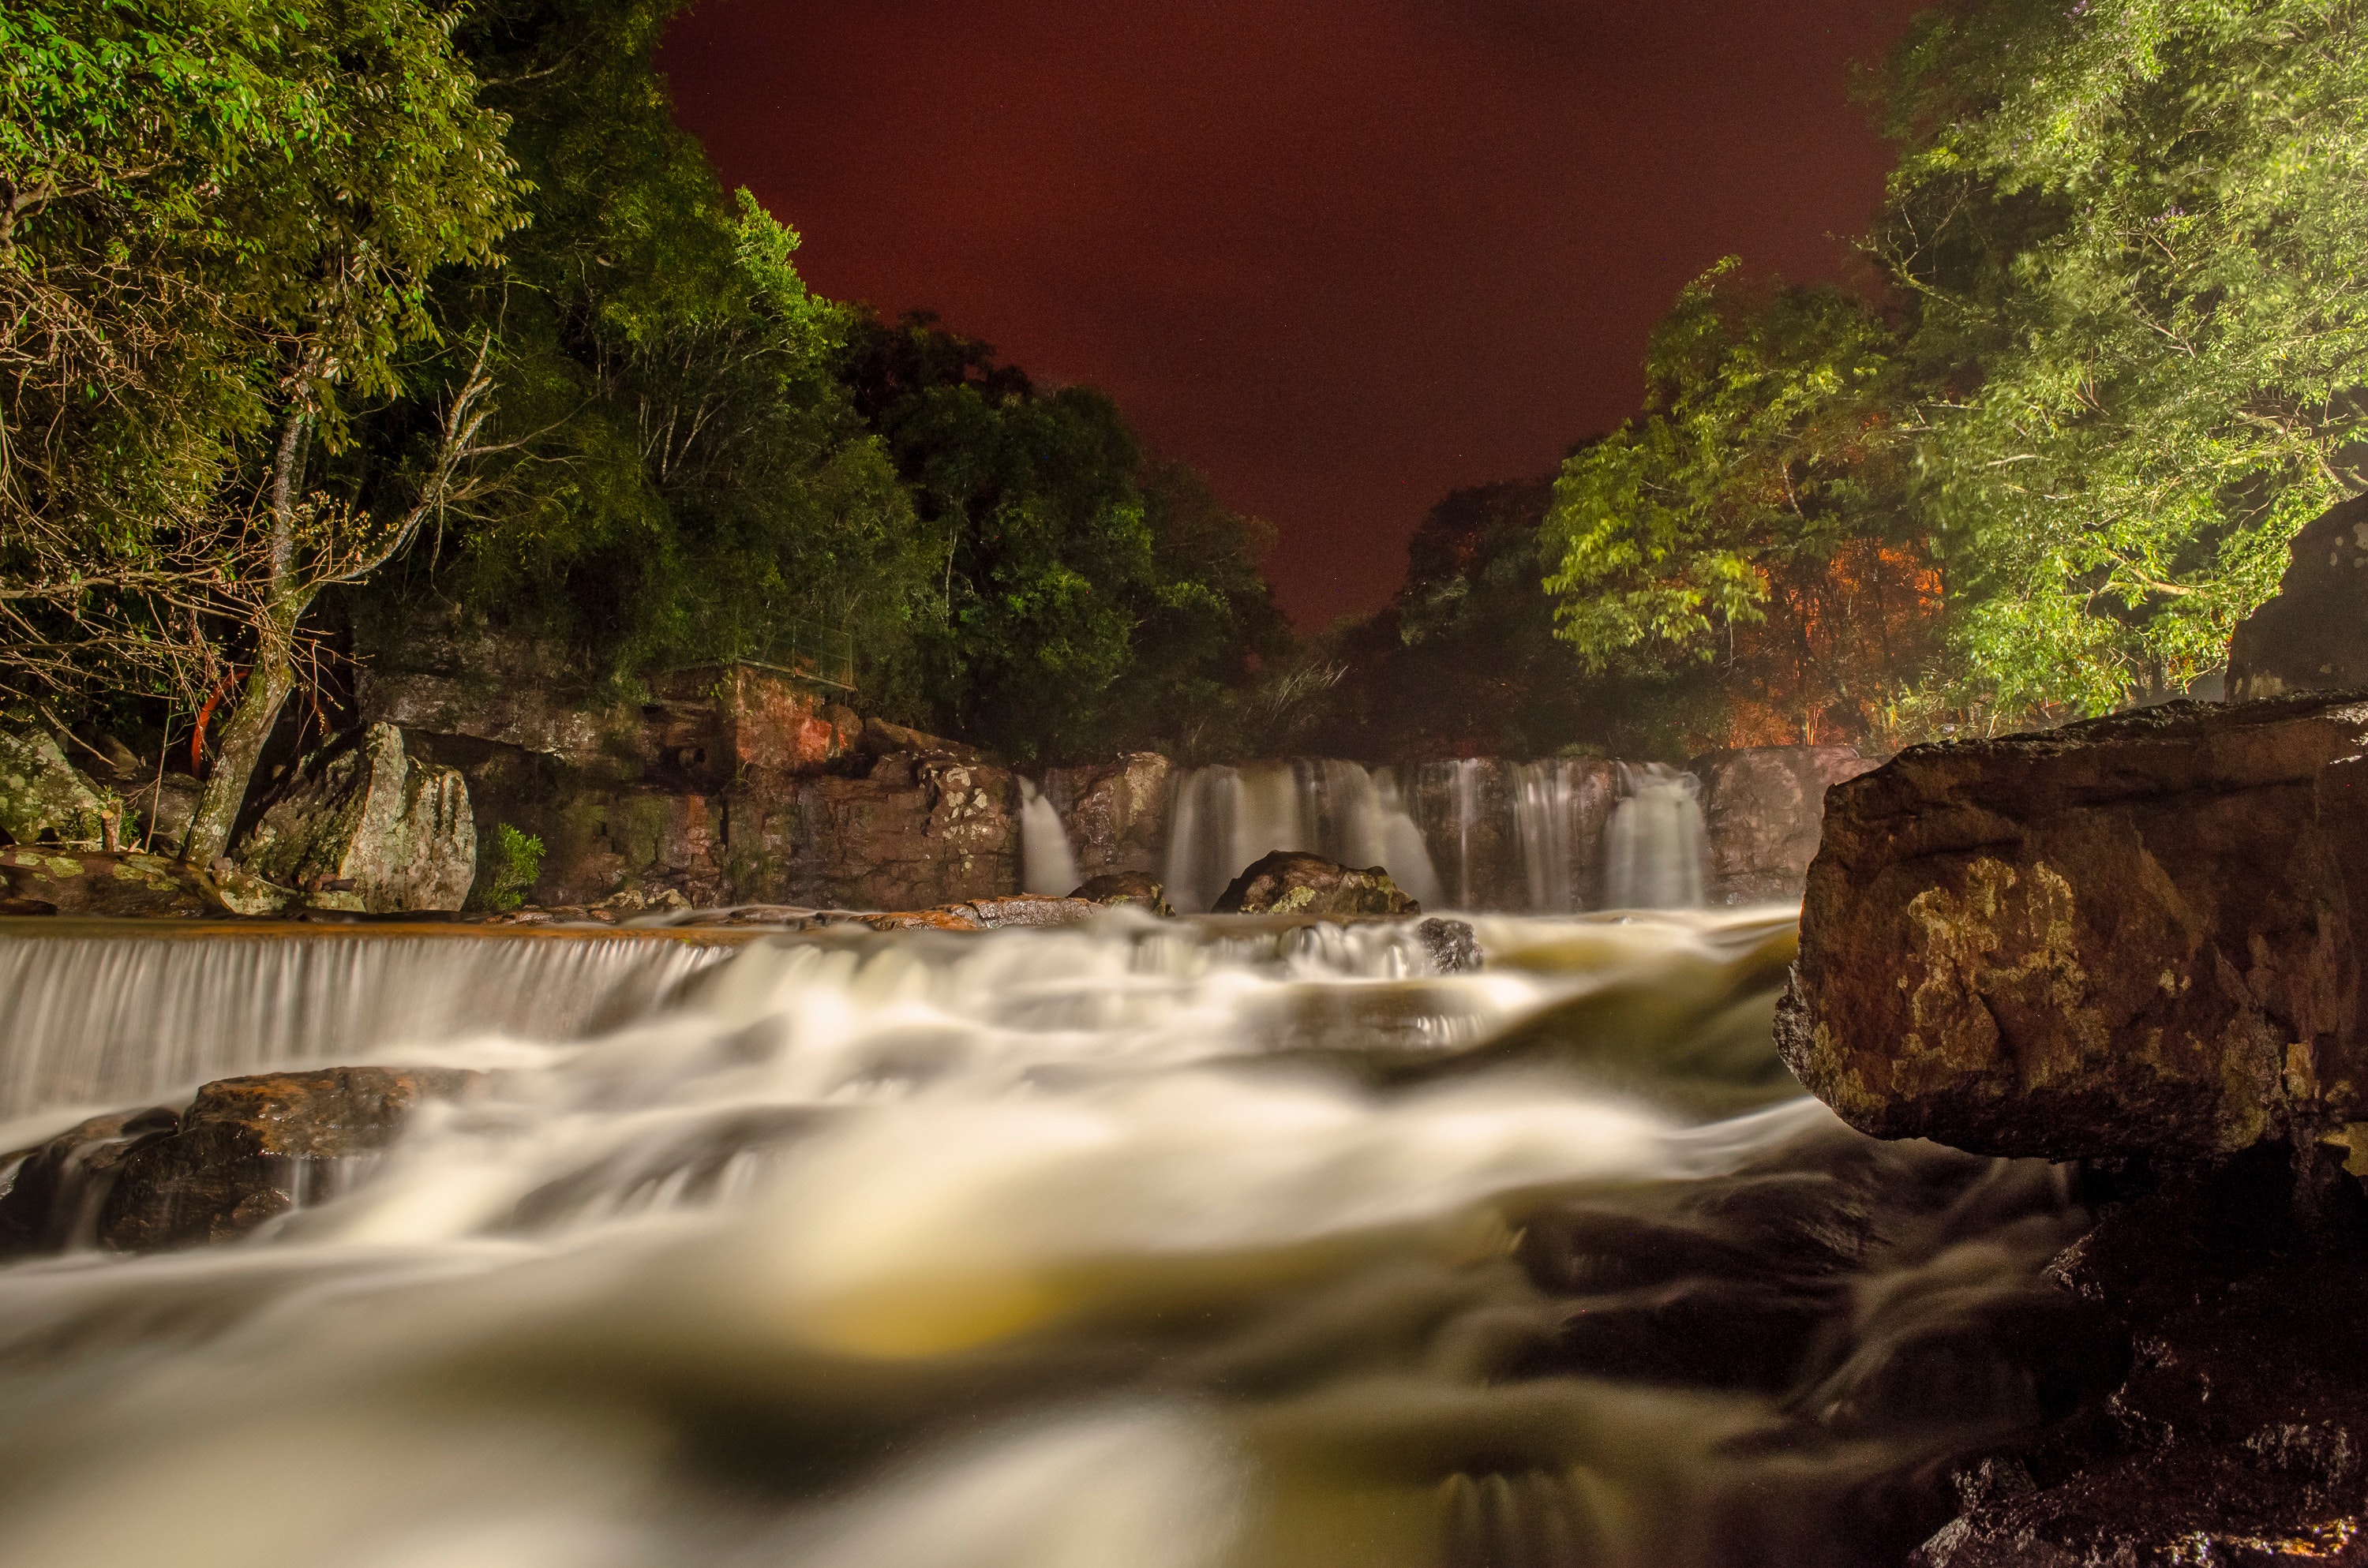 Green Leaf Trees Near the Flowing Water Fall, Cascade, Dark, Landscape, Nature, HQ Photo